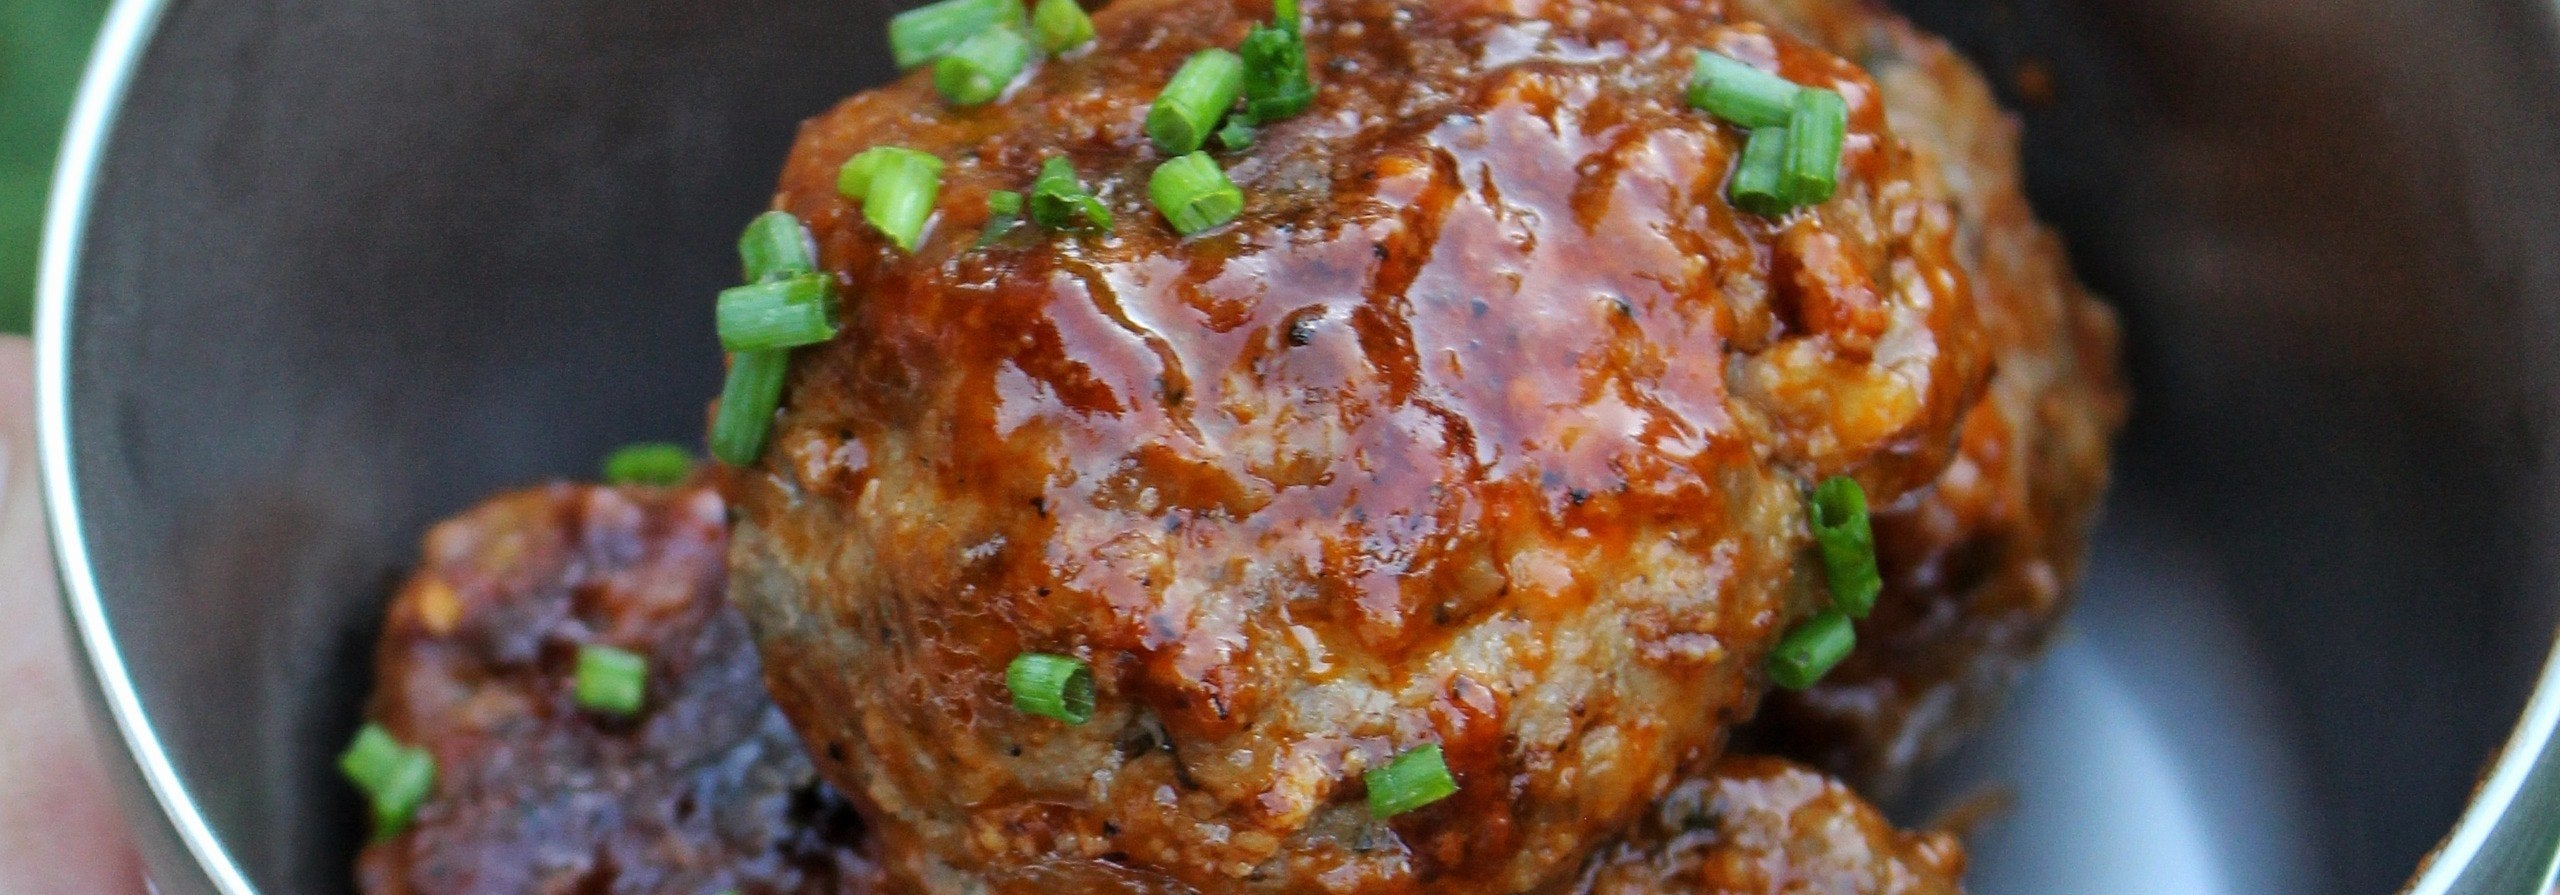 Kick-Off Game Day Tailgating With This BBQ Beer Meatballs Recipe